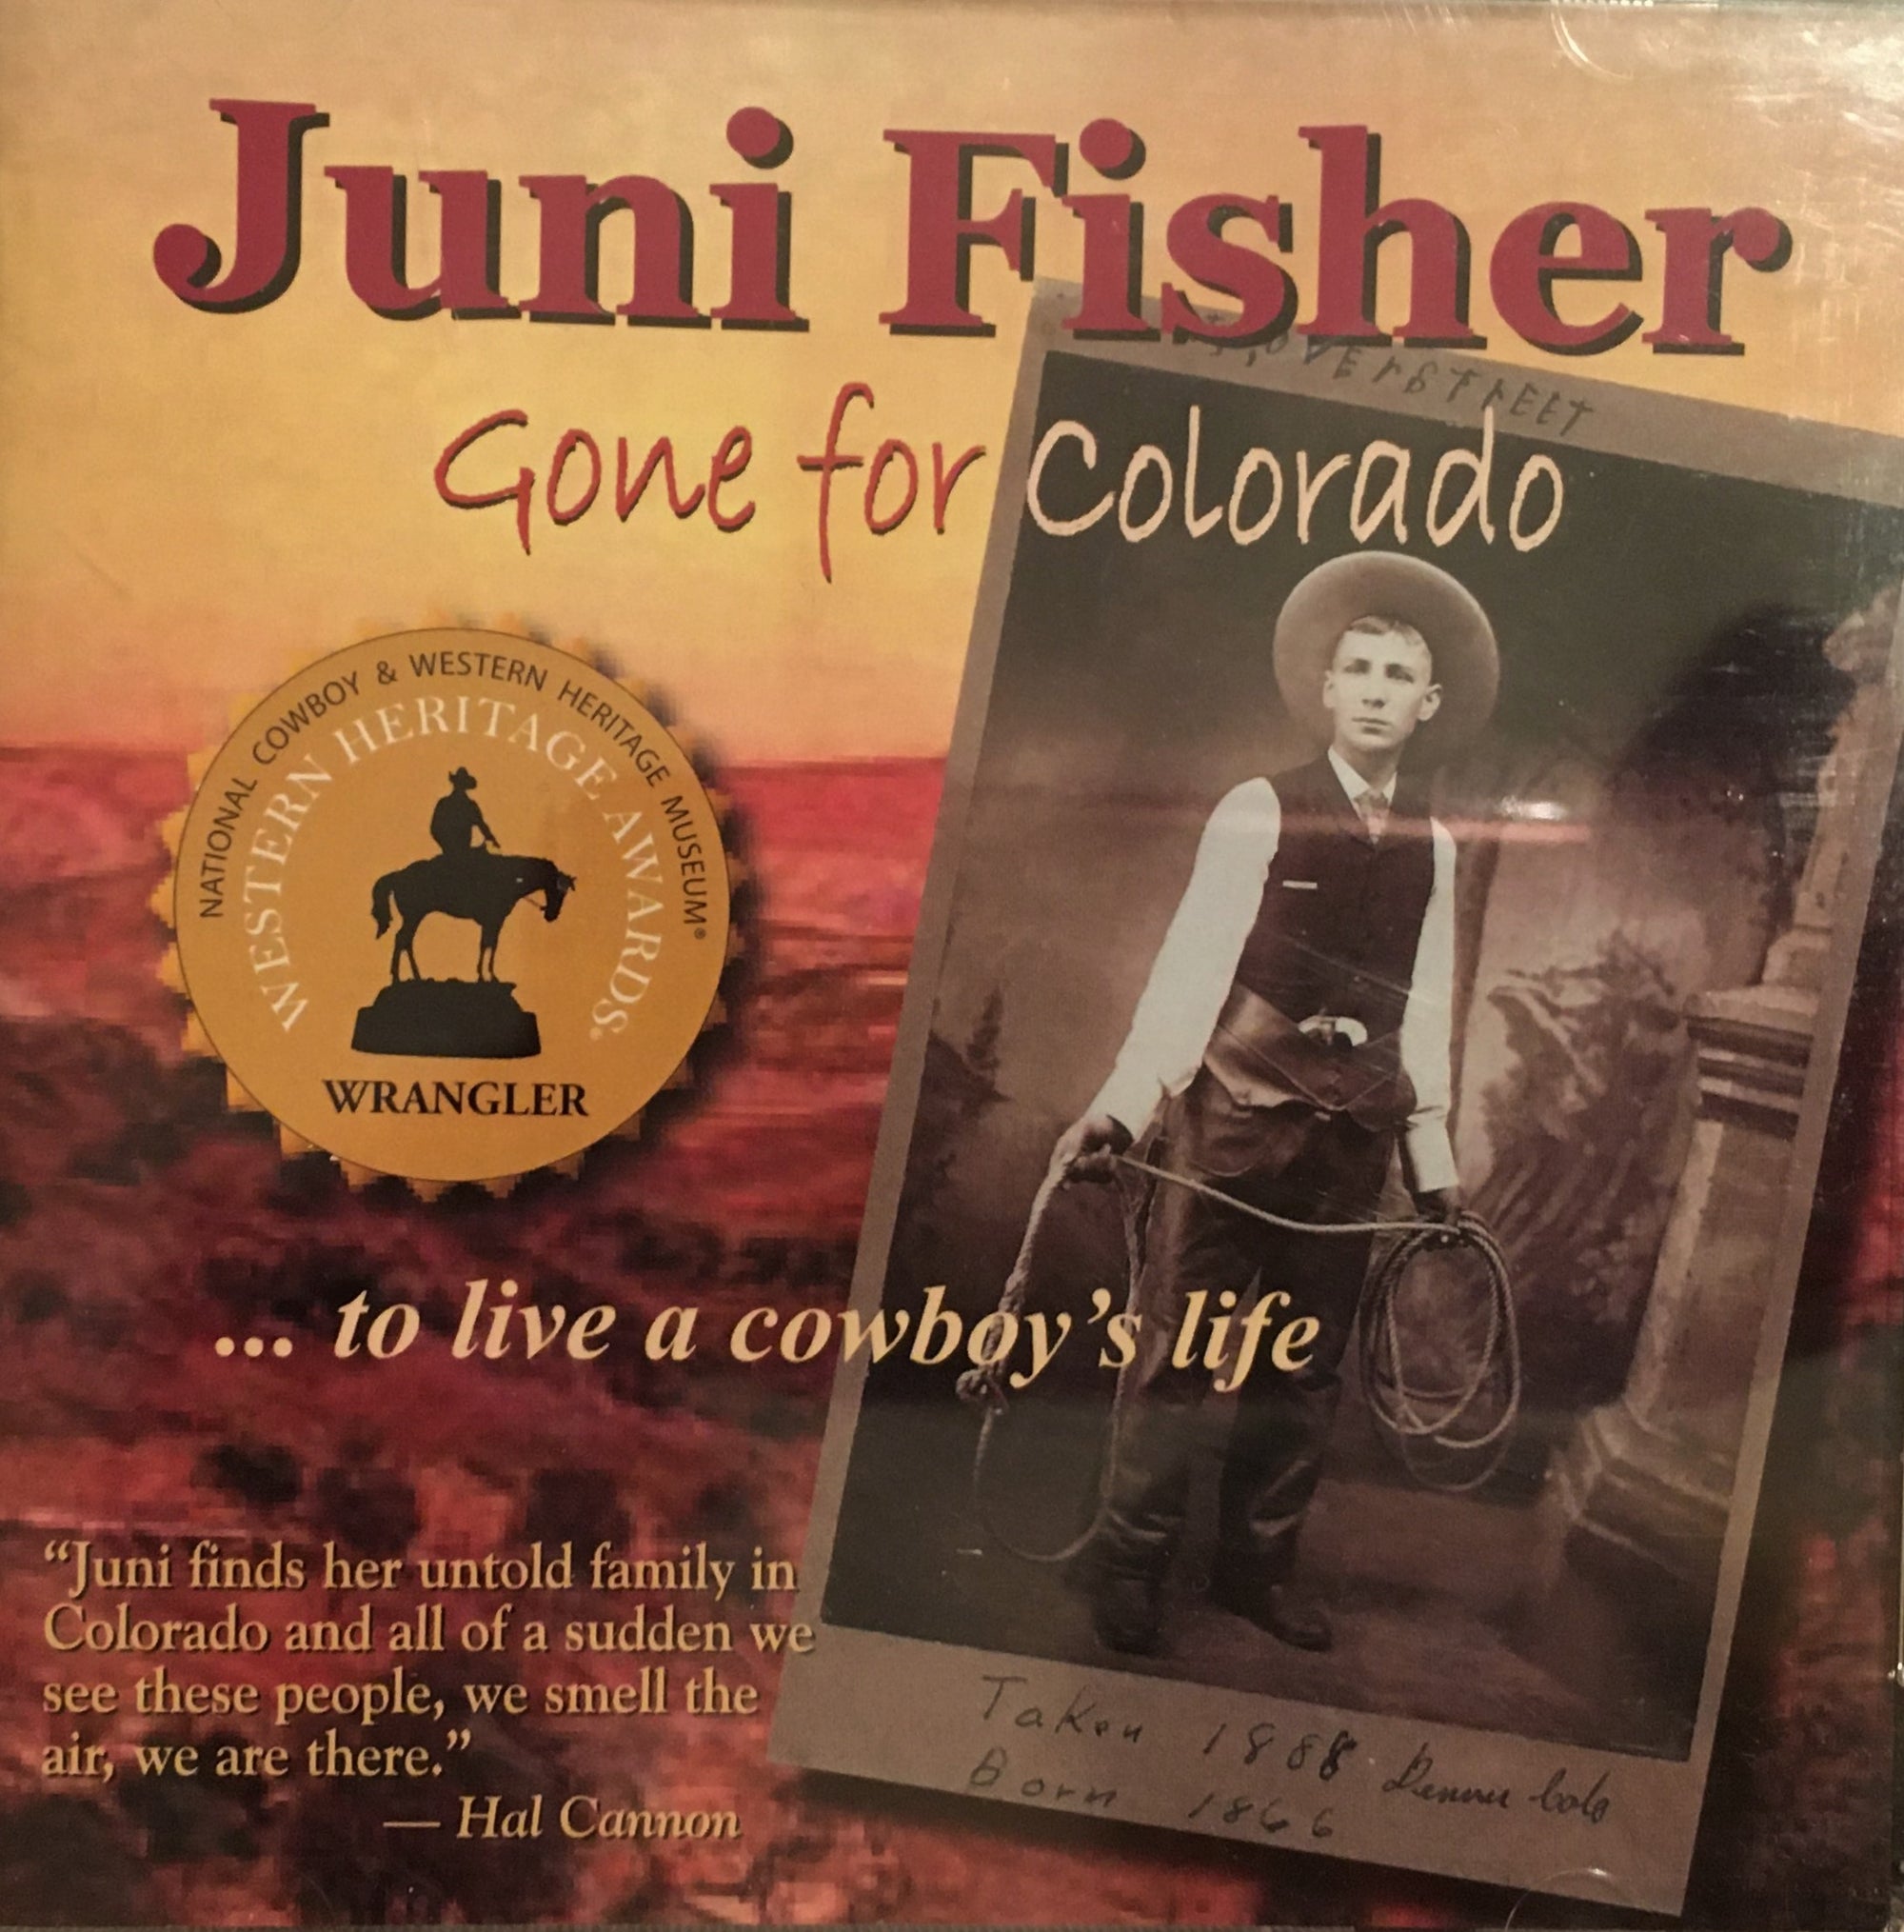 CD Gone For Colorado by Juni Fisher